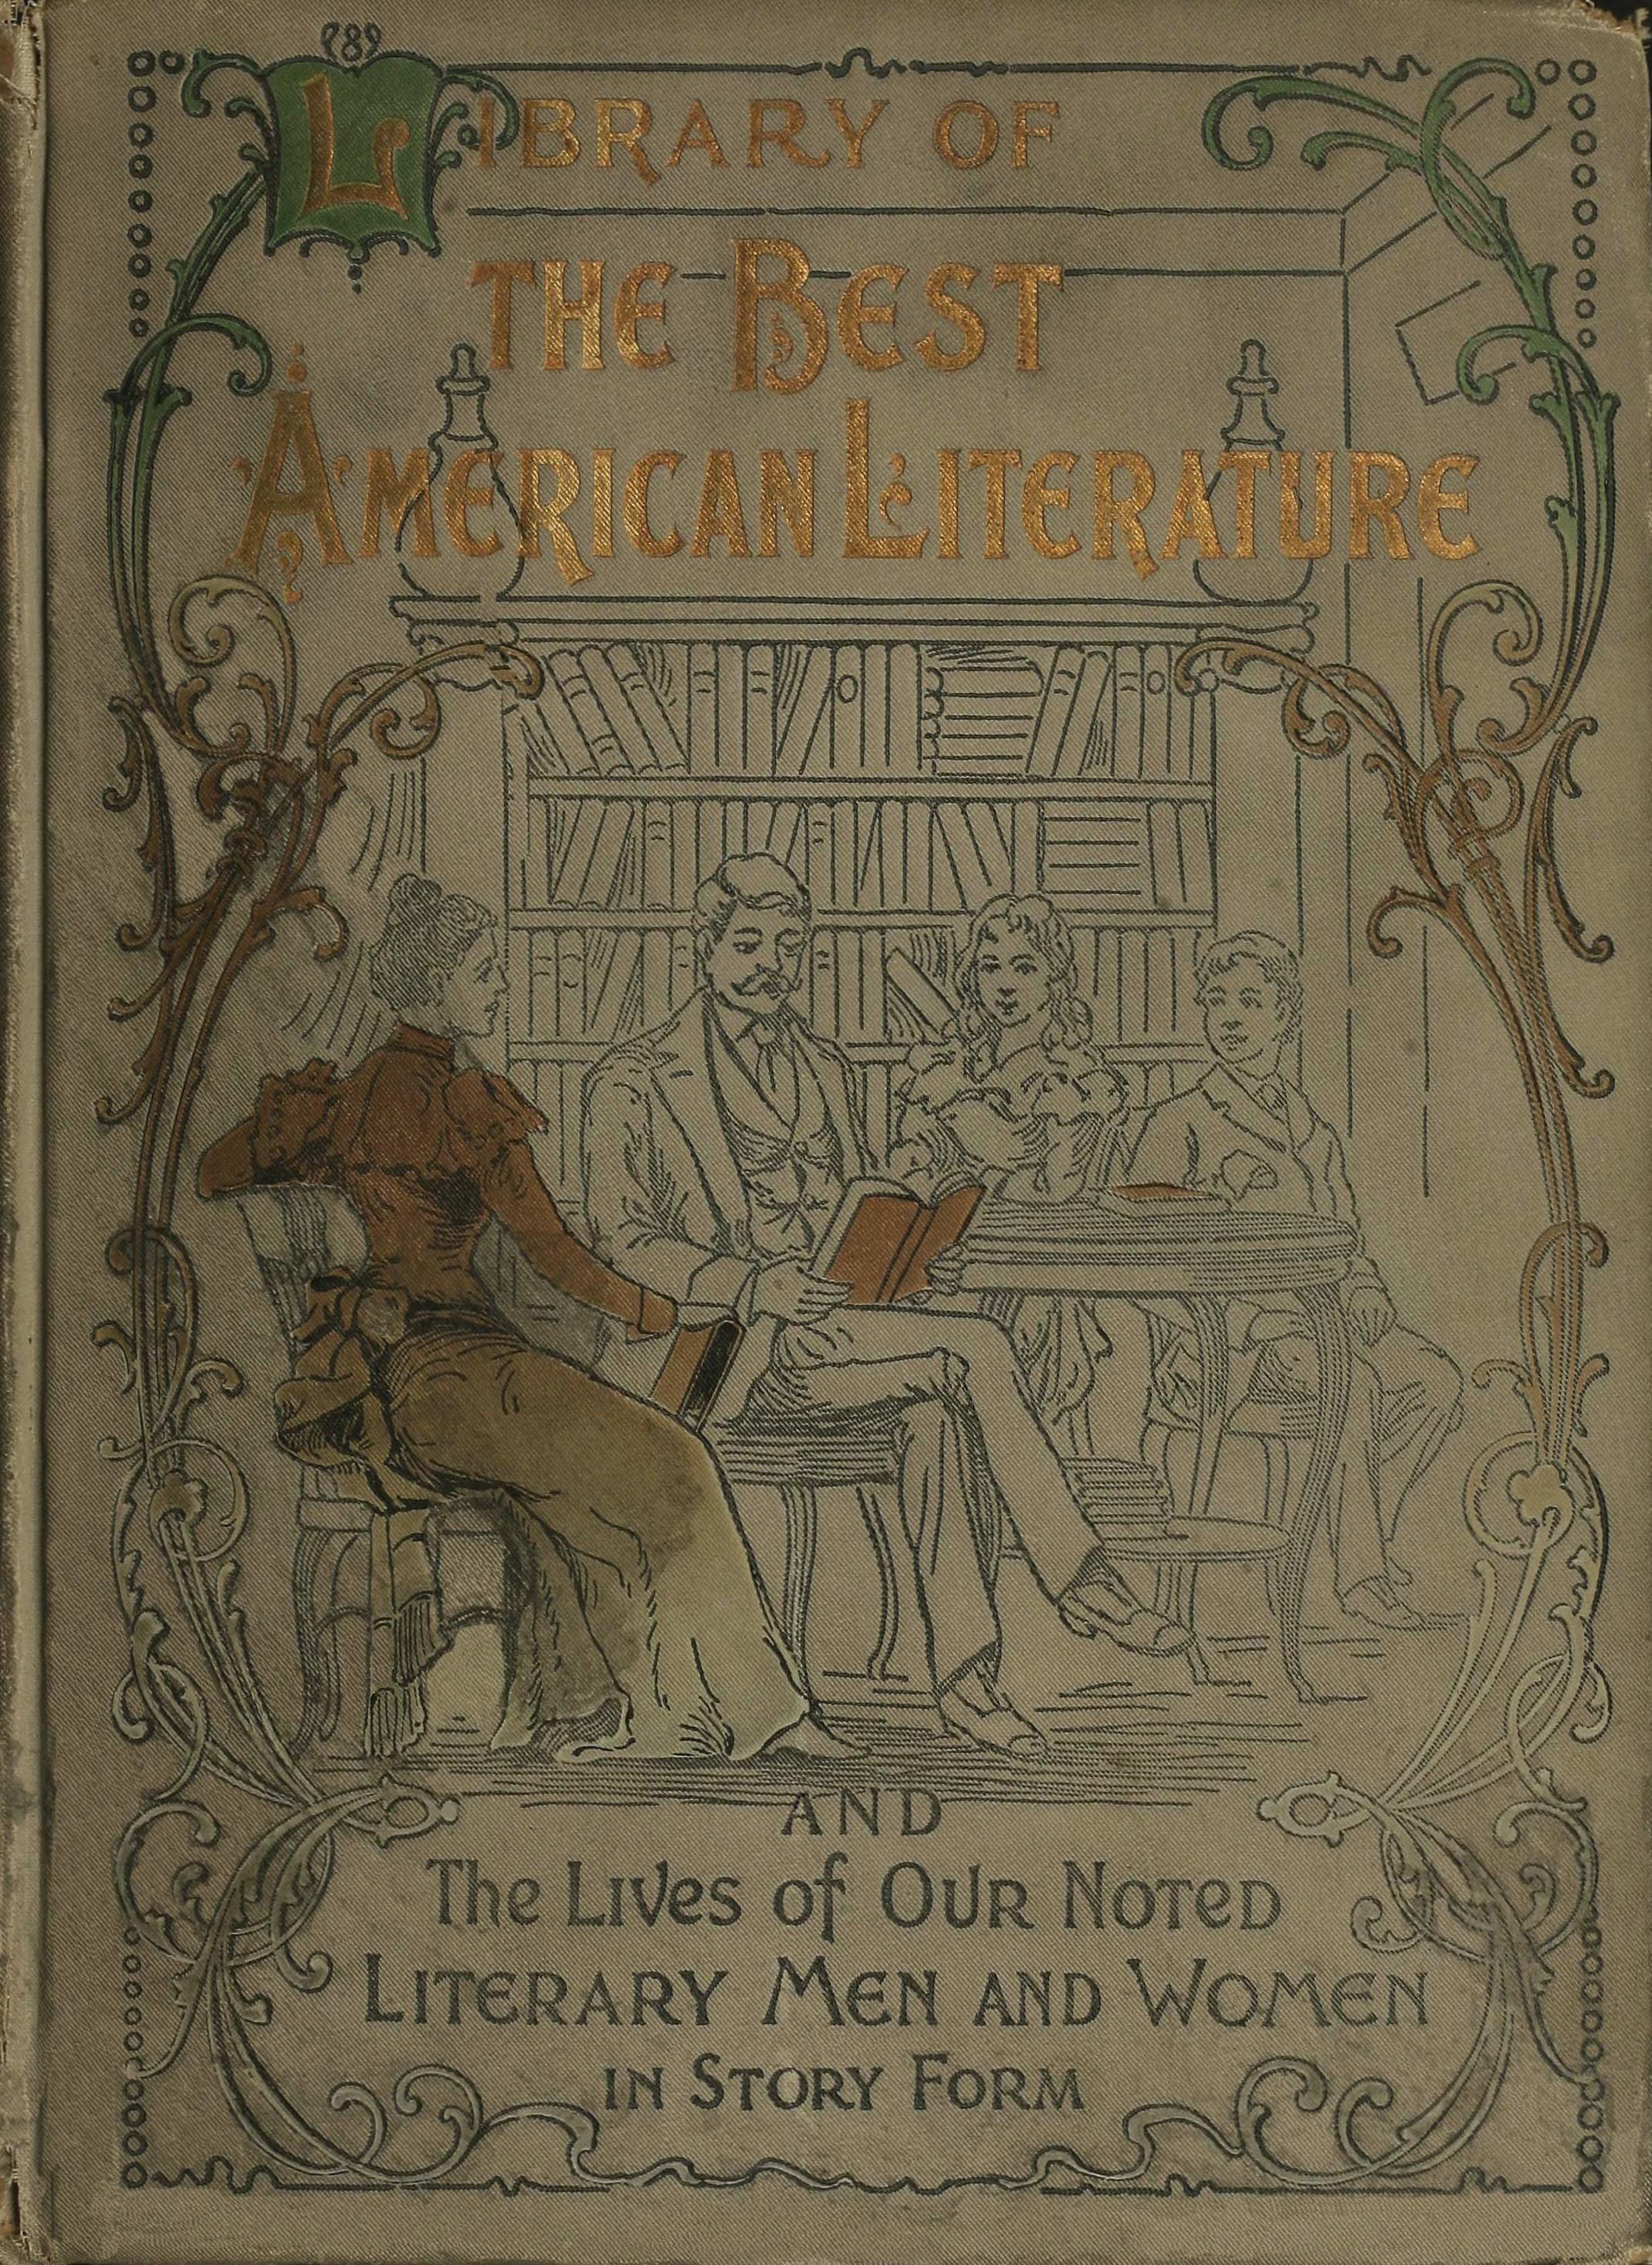 Library of the Best American Literature, by Various—A Project Gutenberg eBook